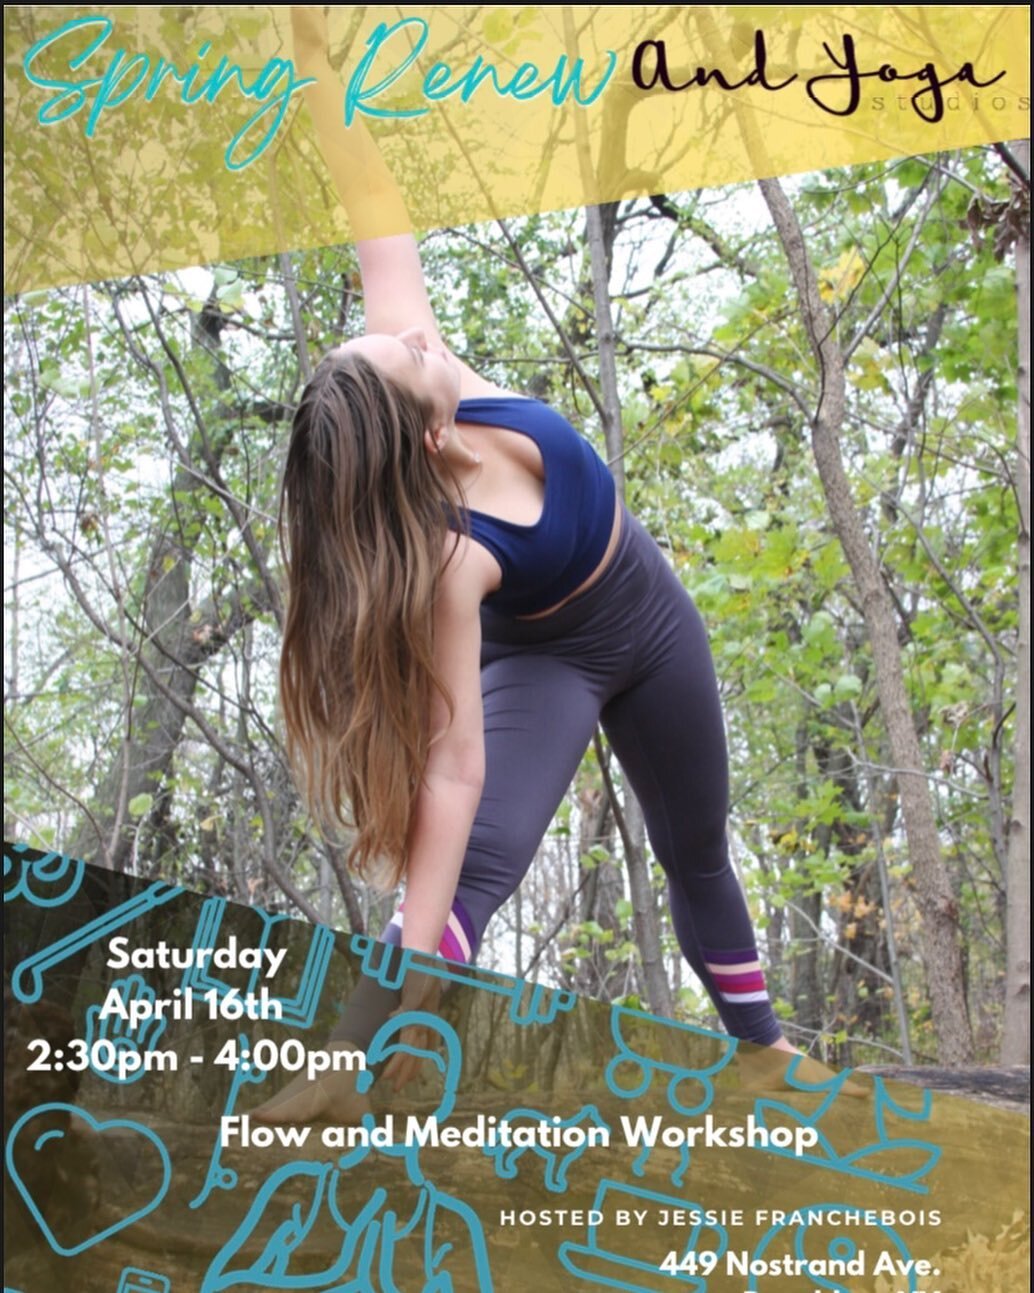 Join us at And Yoga for a rejuvenating practice on April 16. 
Our instructor, Jessie will guide you through a special practice dedicated to the fresh energy of Spring. This 90 minute class will reset the body, mind, and spirit, cultivating expansion 